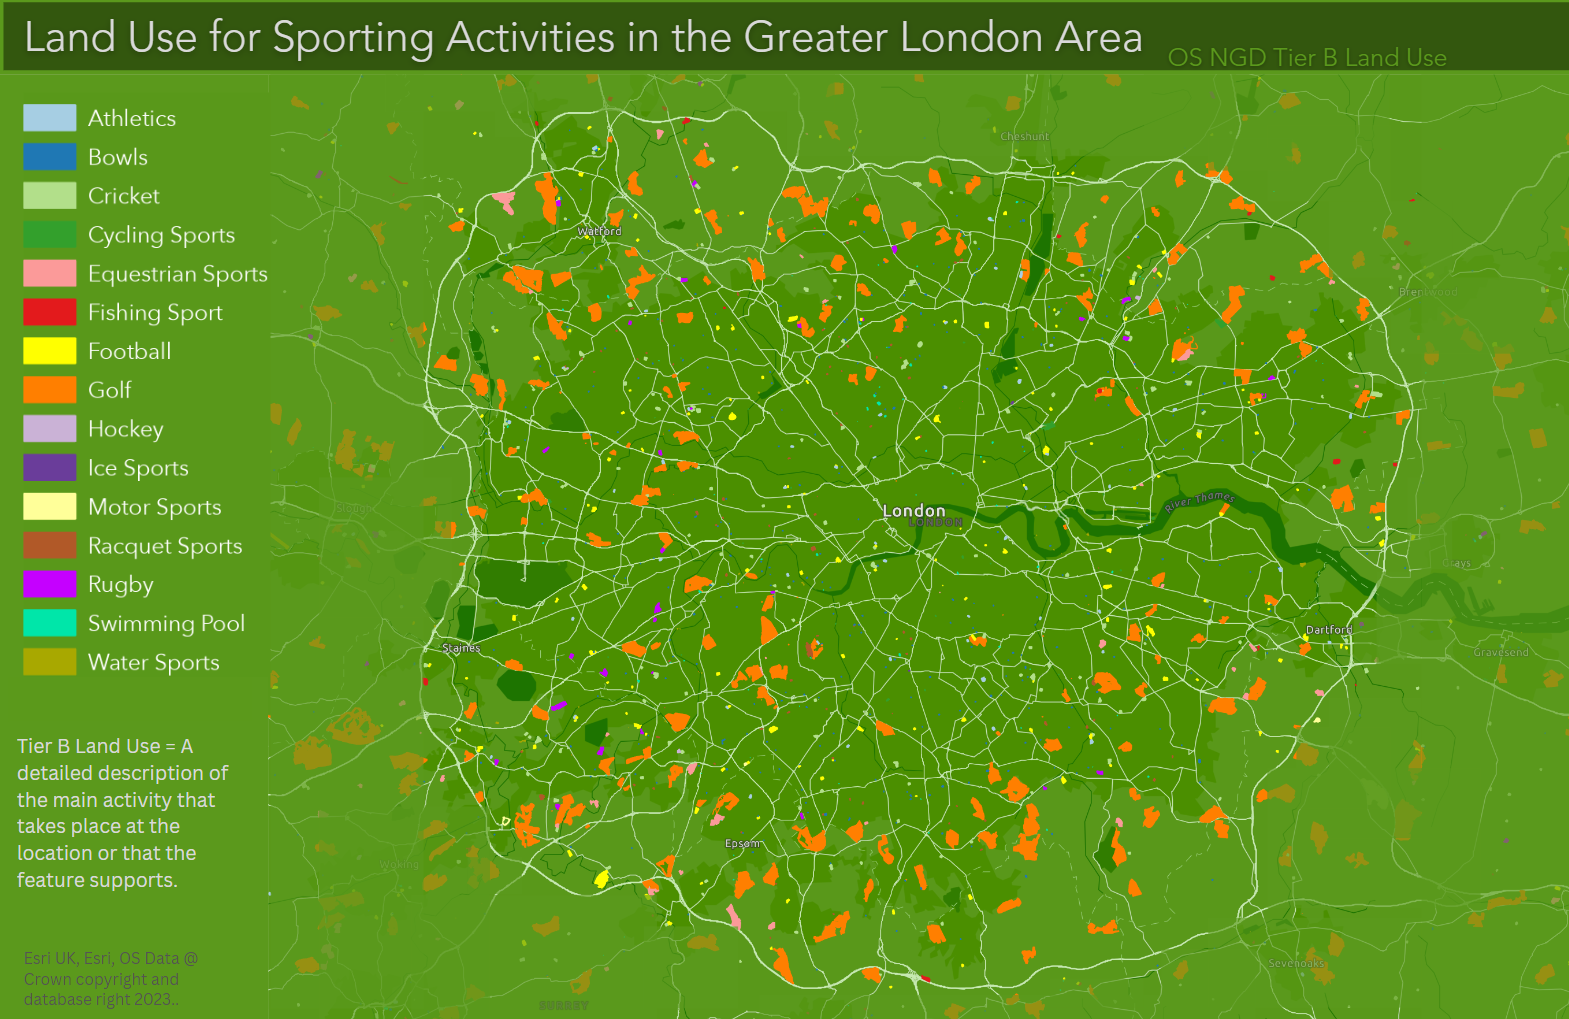 Fig 2: OS NGD Tier B Land Use for Sporting Activities in the Greater London Area.  